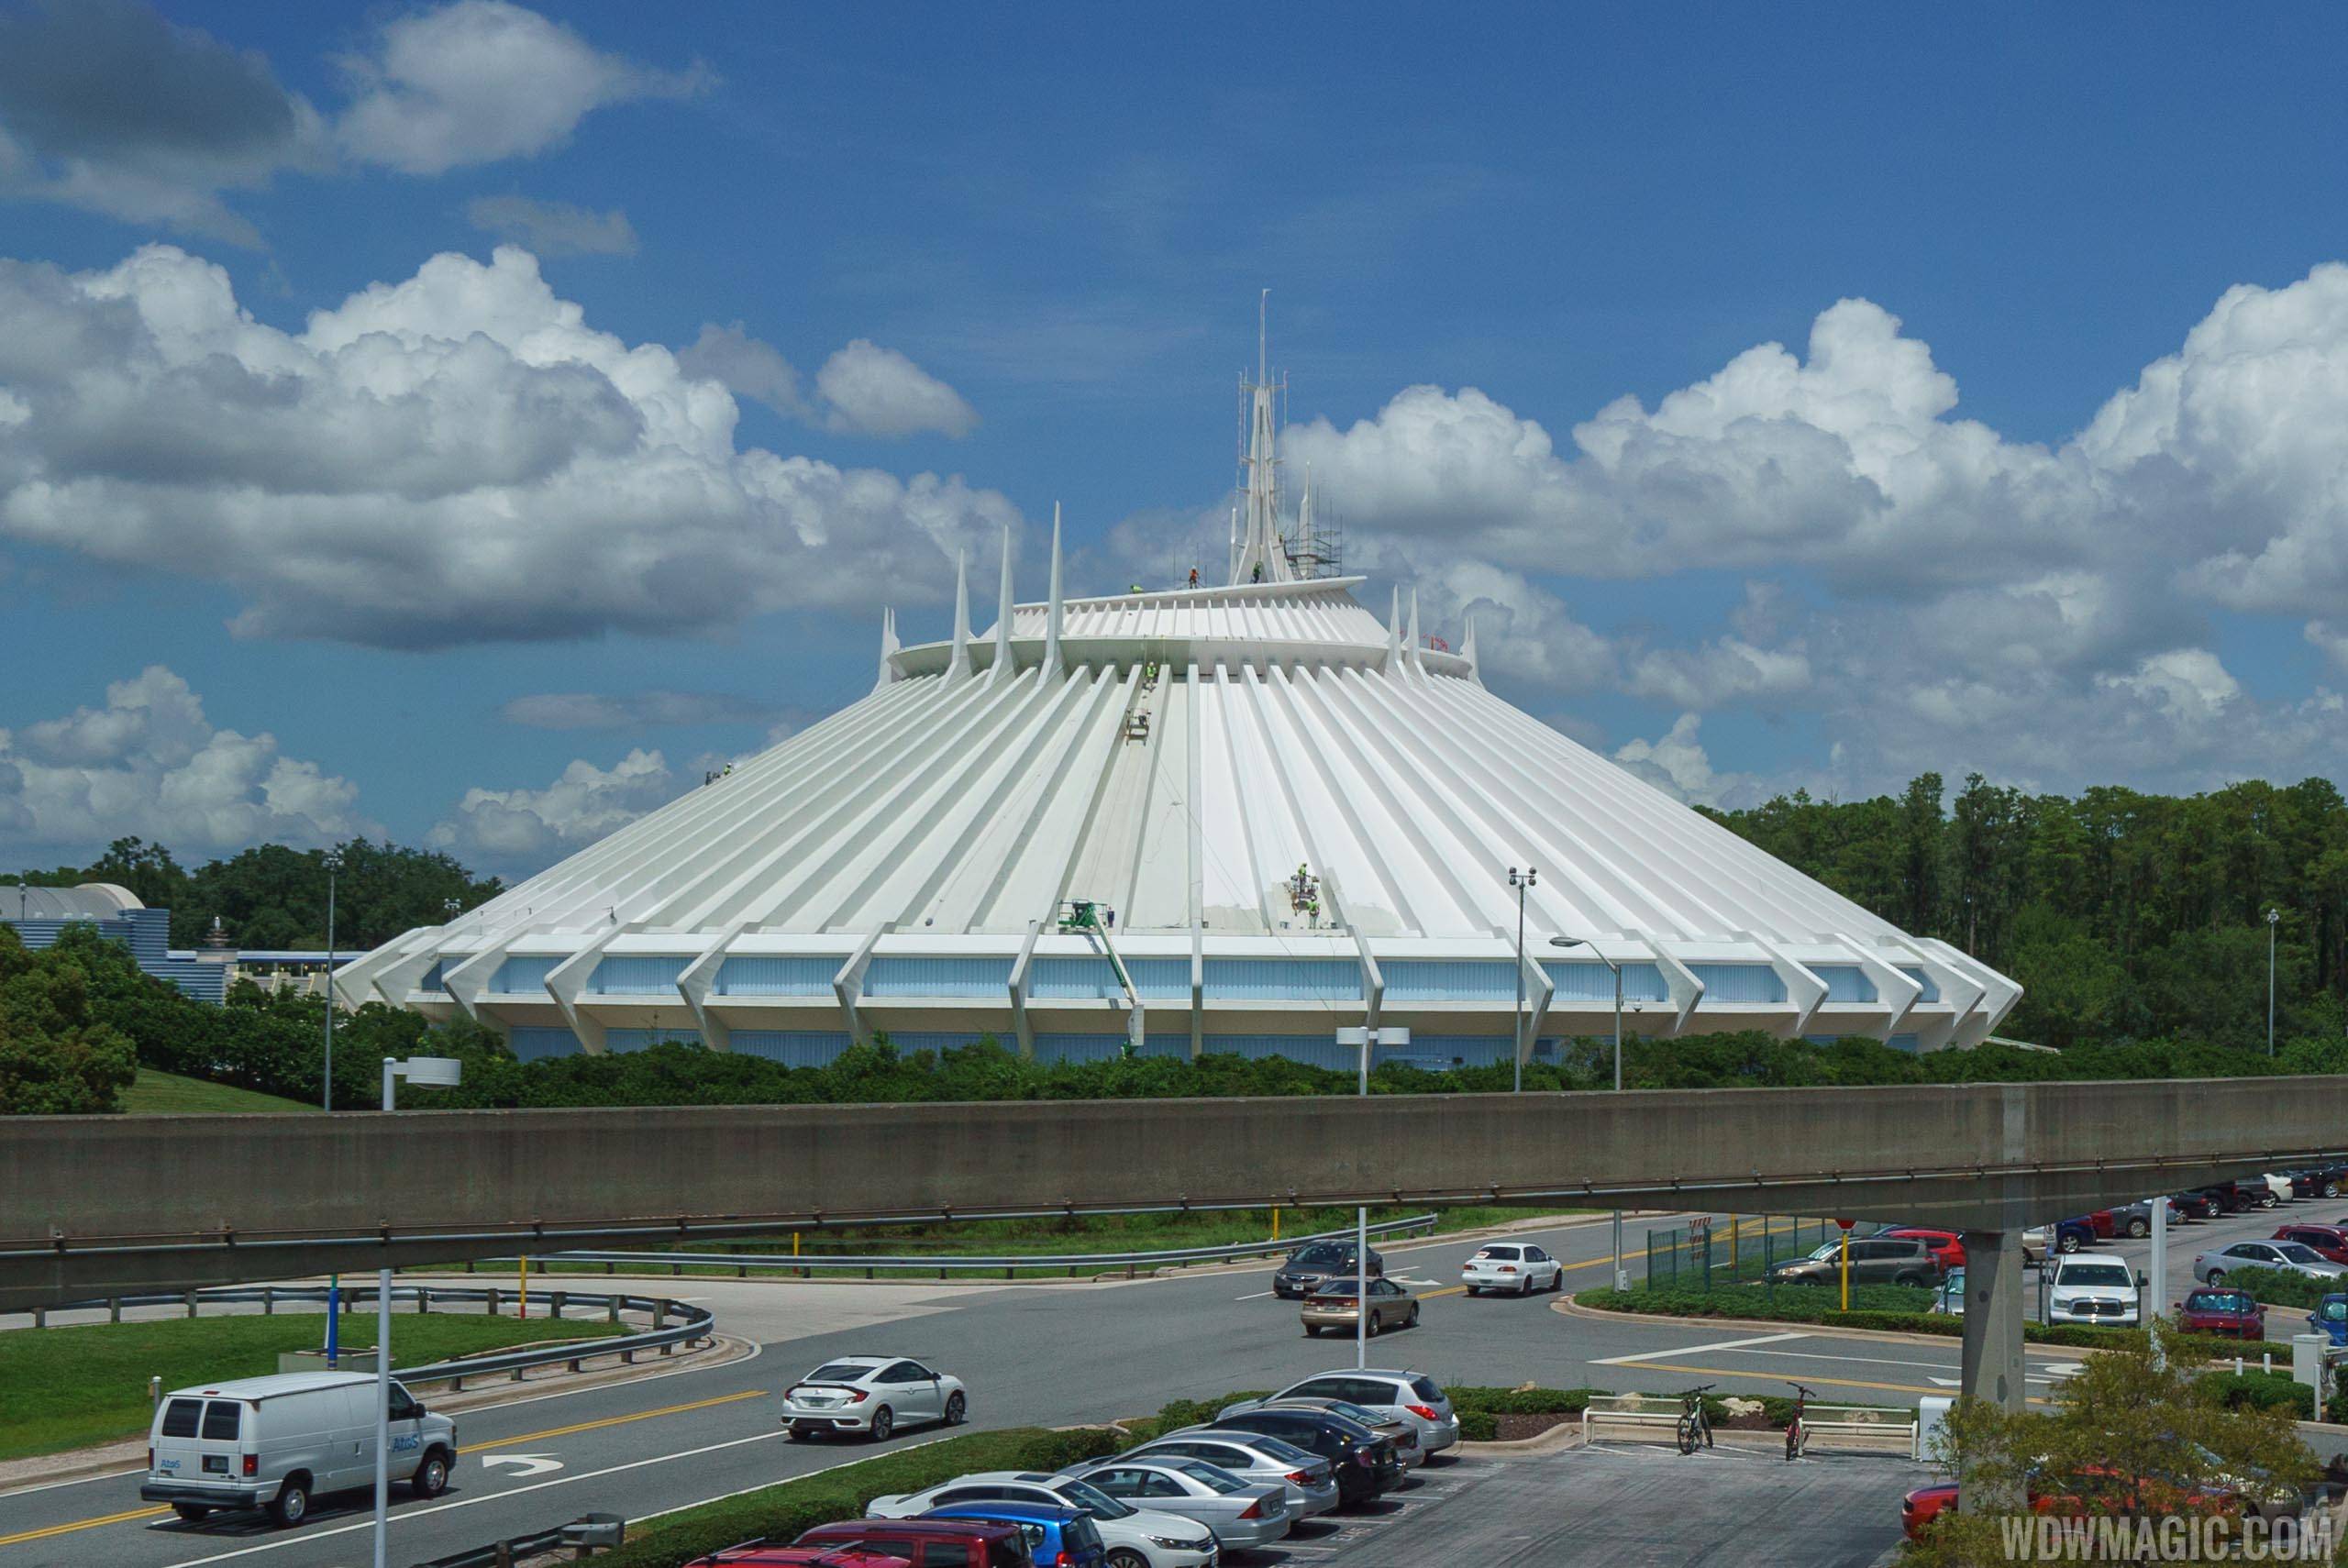 PHOTO - New paint for Space Mountain